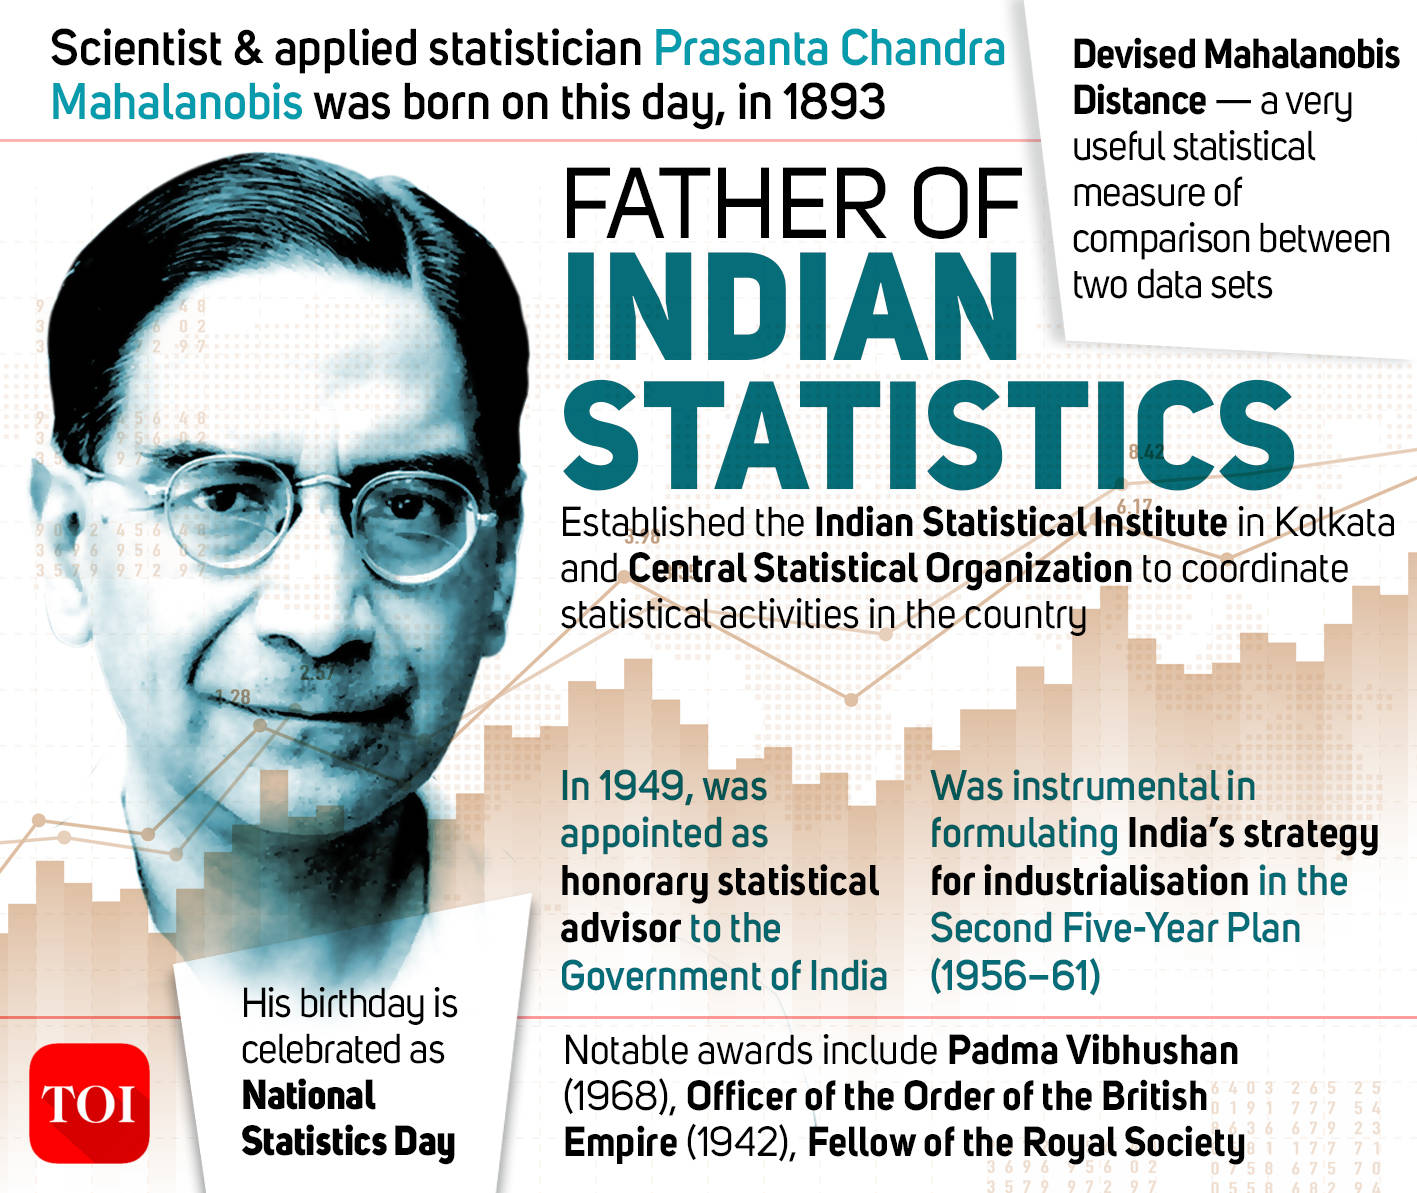 The Times Of India on Twitter: "You share your b'day with... Father of Indian Statistics..... Prasanta Chandra Mahalanobis https://t.co/4bKNJor2Pk" / Twitter